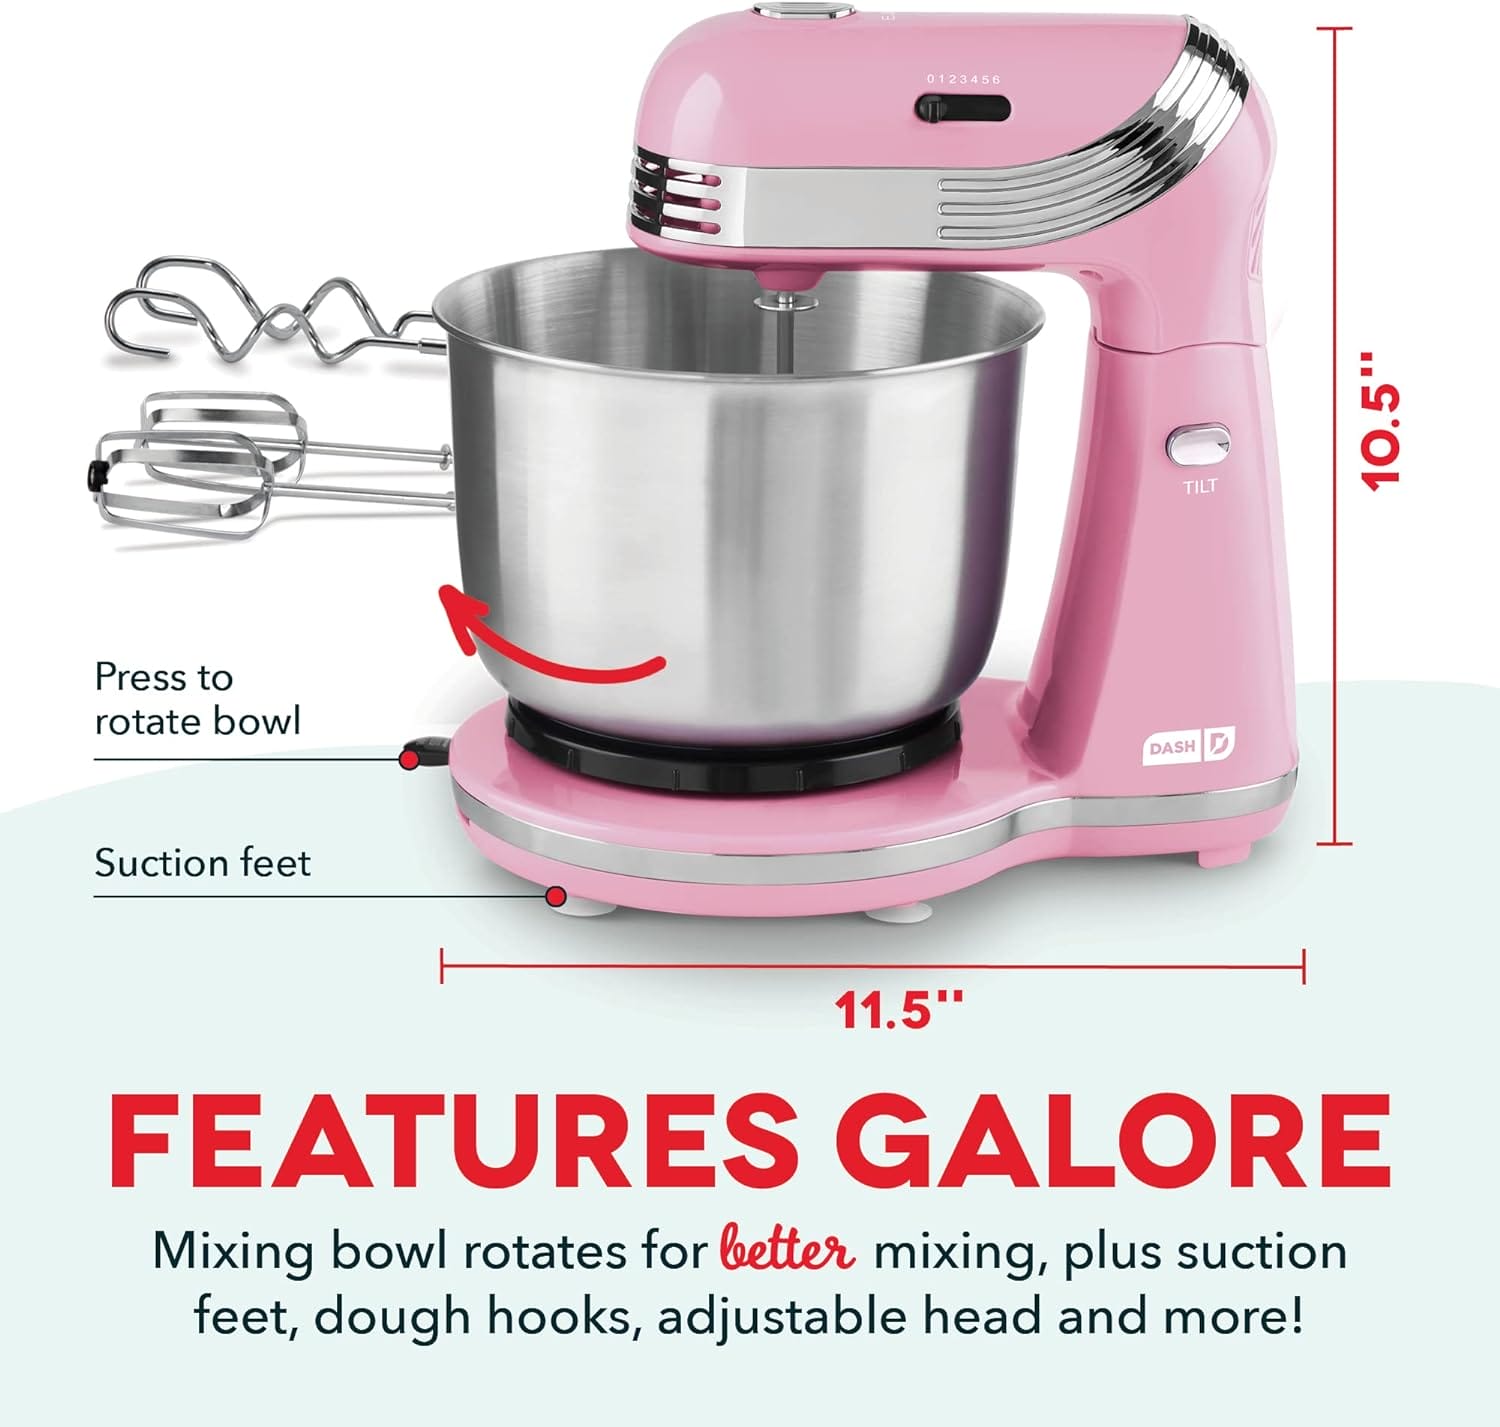 Dash Stand Mixer (Electric Mixer for Everyday Use): 6 Speed Stand Mixer with 3 Quart Stainless Steel Mixing Bowl, Dough Hooks  Mixer Beaters for Dressings, Frosting, Meringues  More - Pink